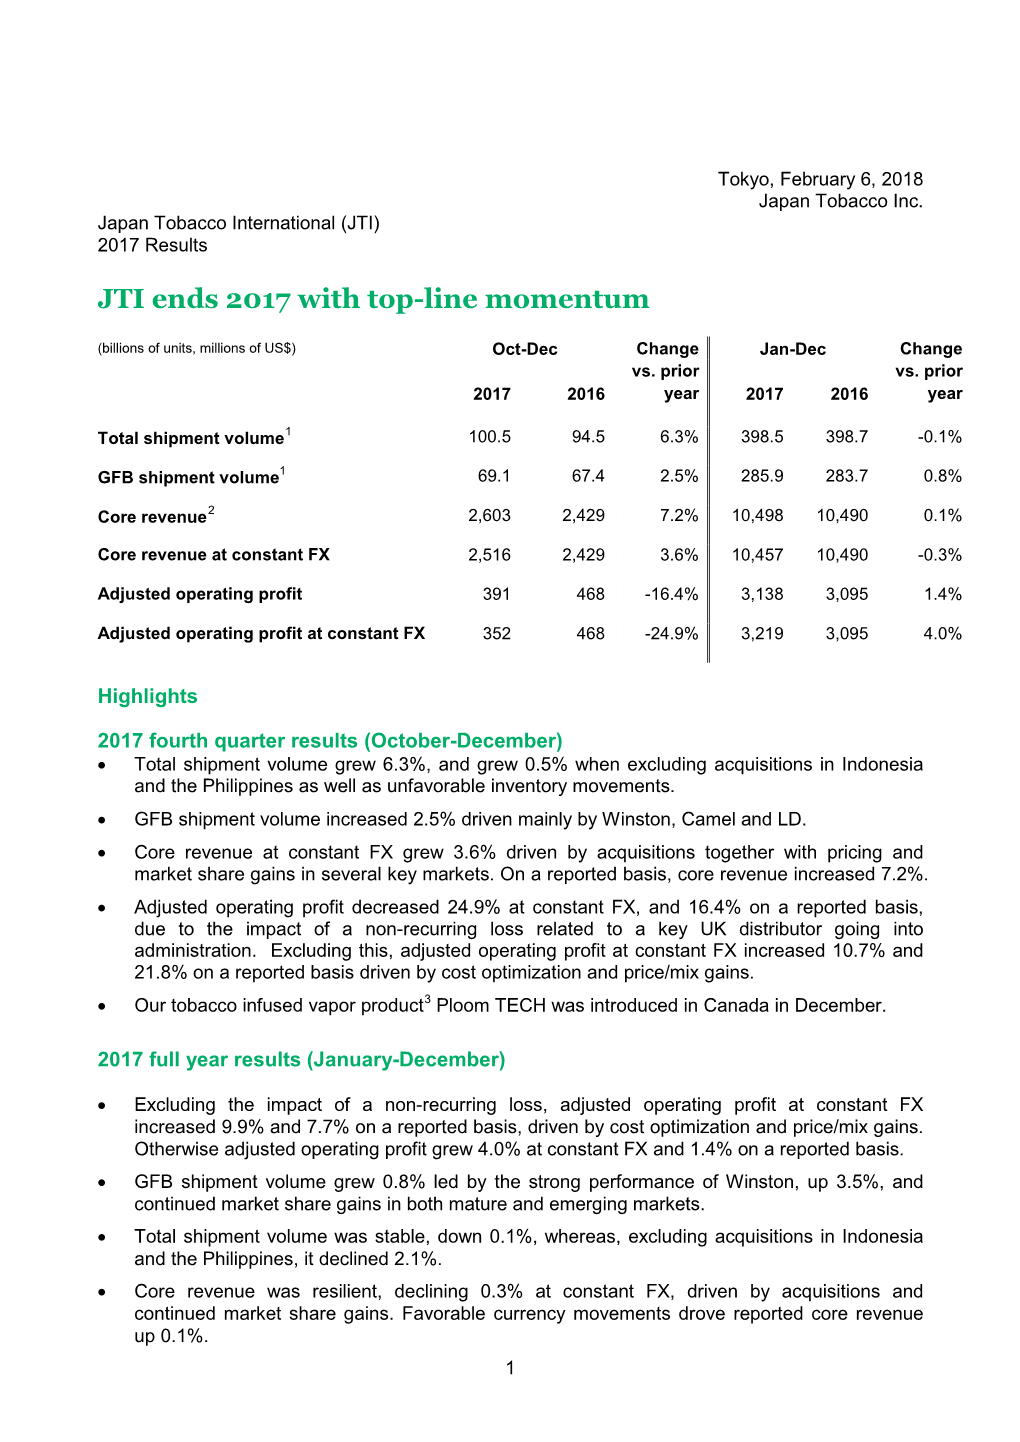 JTI Ends 2017 with Top-Line Momentum